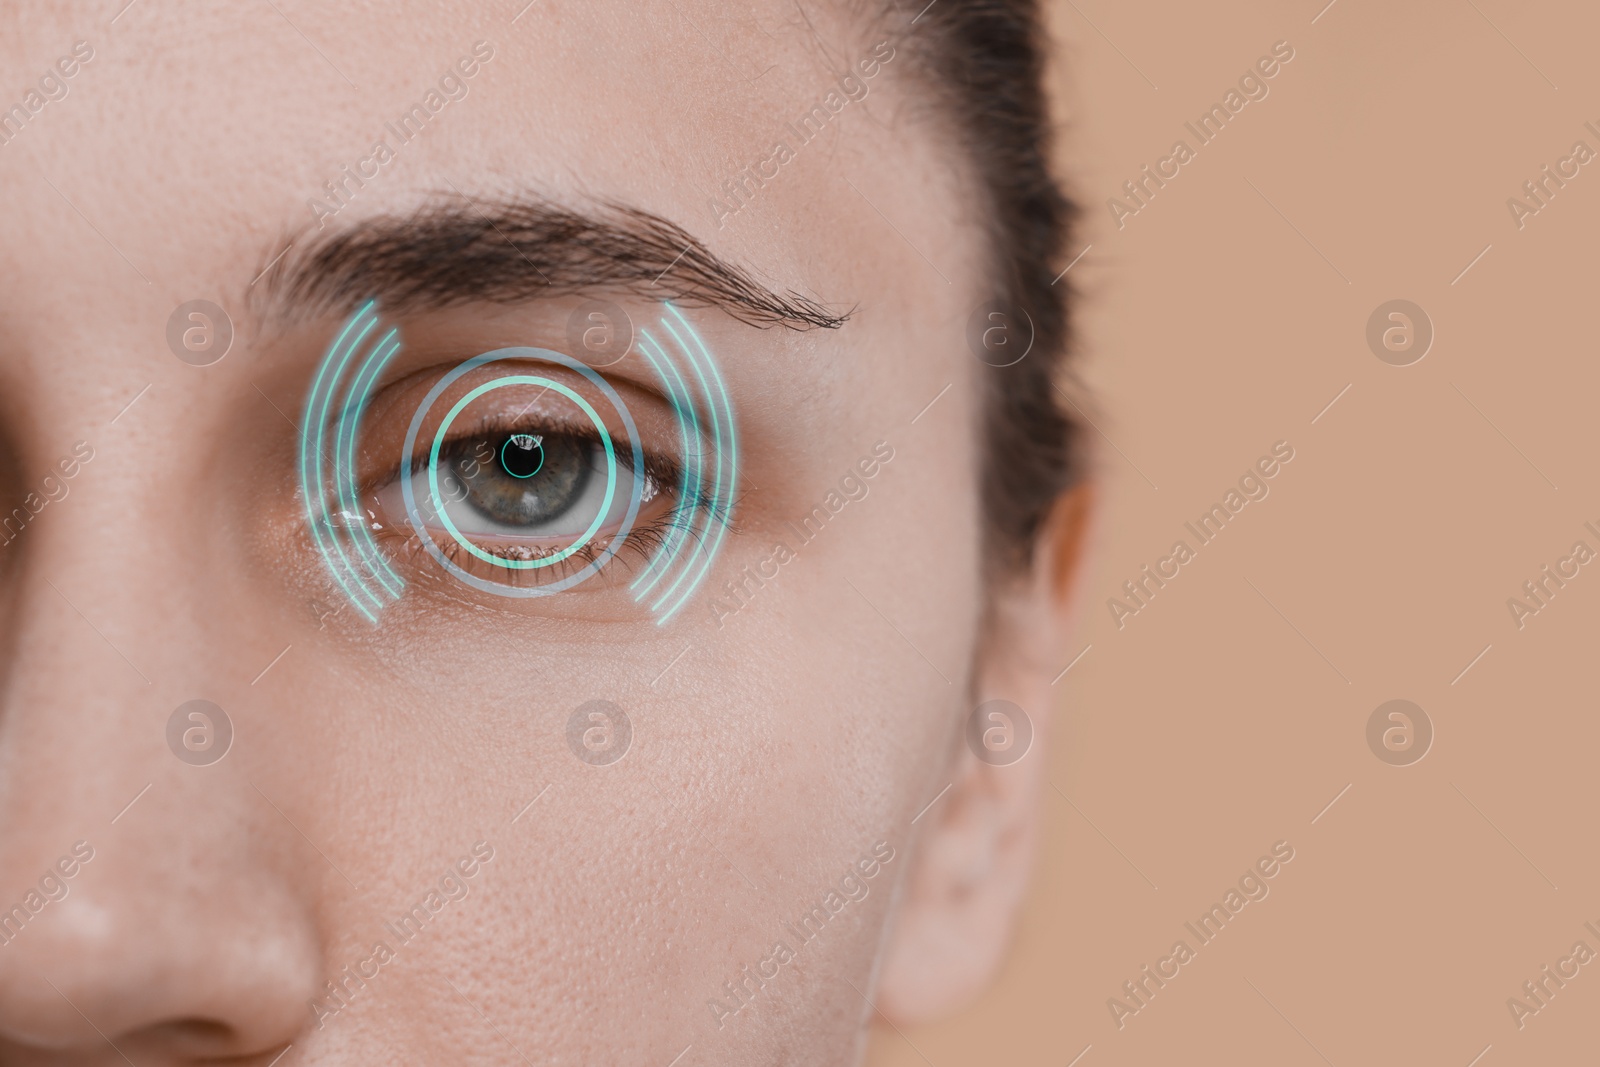 Image of Vision test. Woman and digital scheme focused on her eye against beige background, closeup